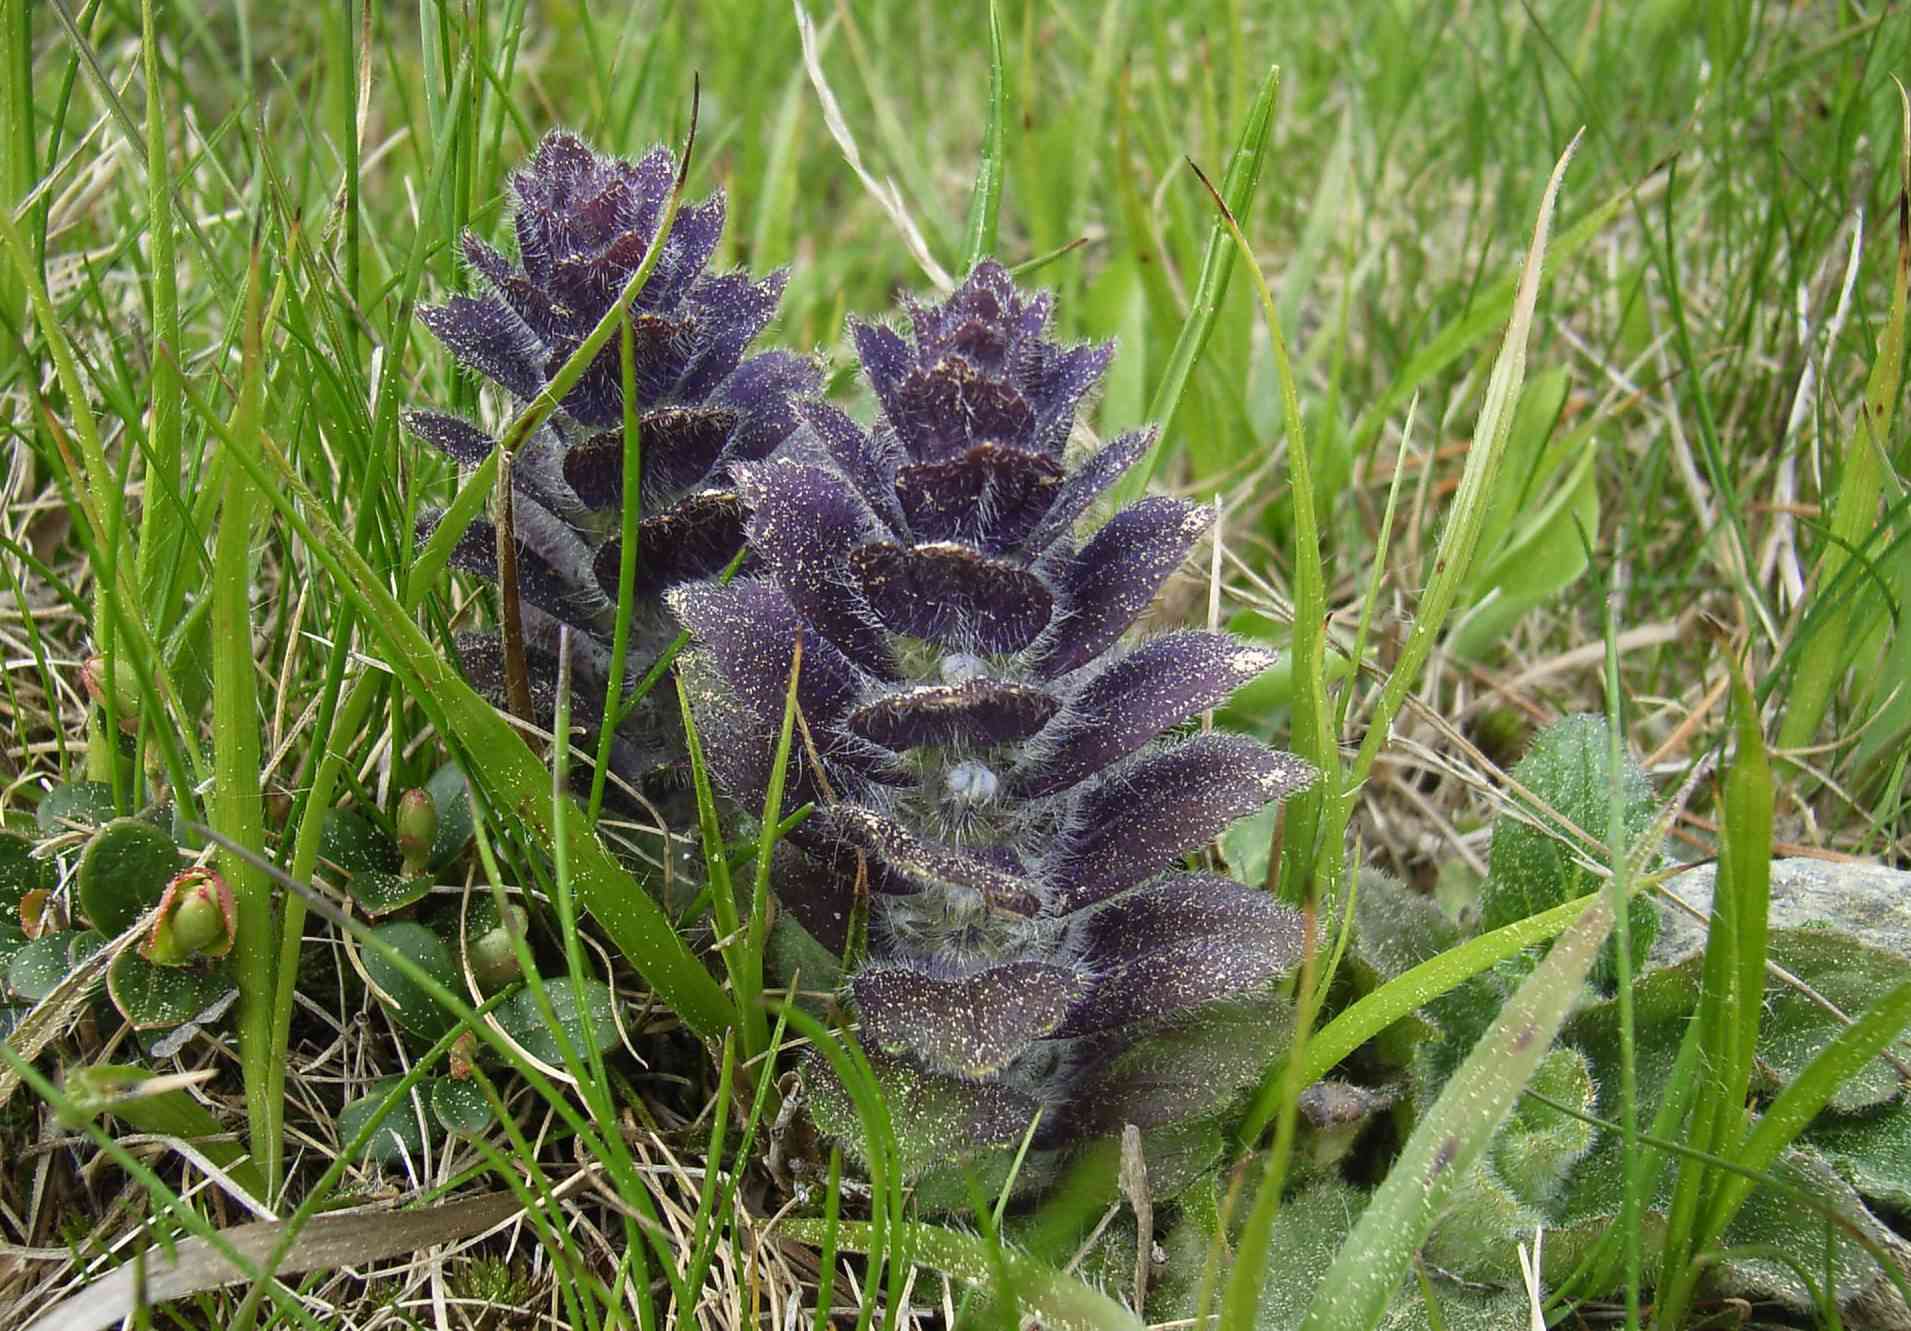 Bugle pyramidale. © Par Rainer J. - CC BY-SA 3.0, https://commons.wikimedia.org/w/index.php?curid=934635